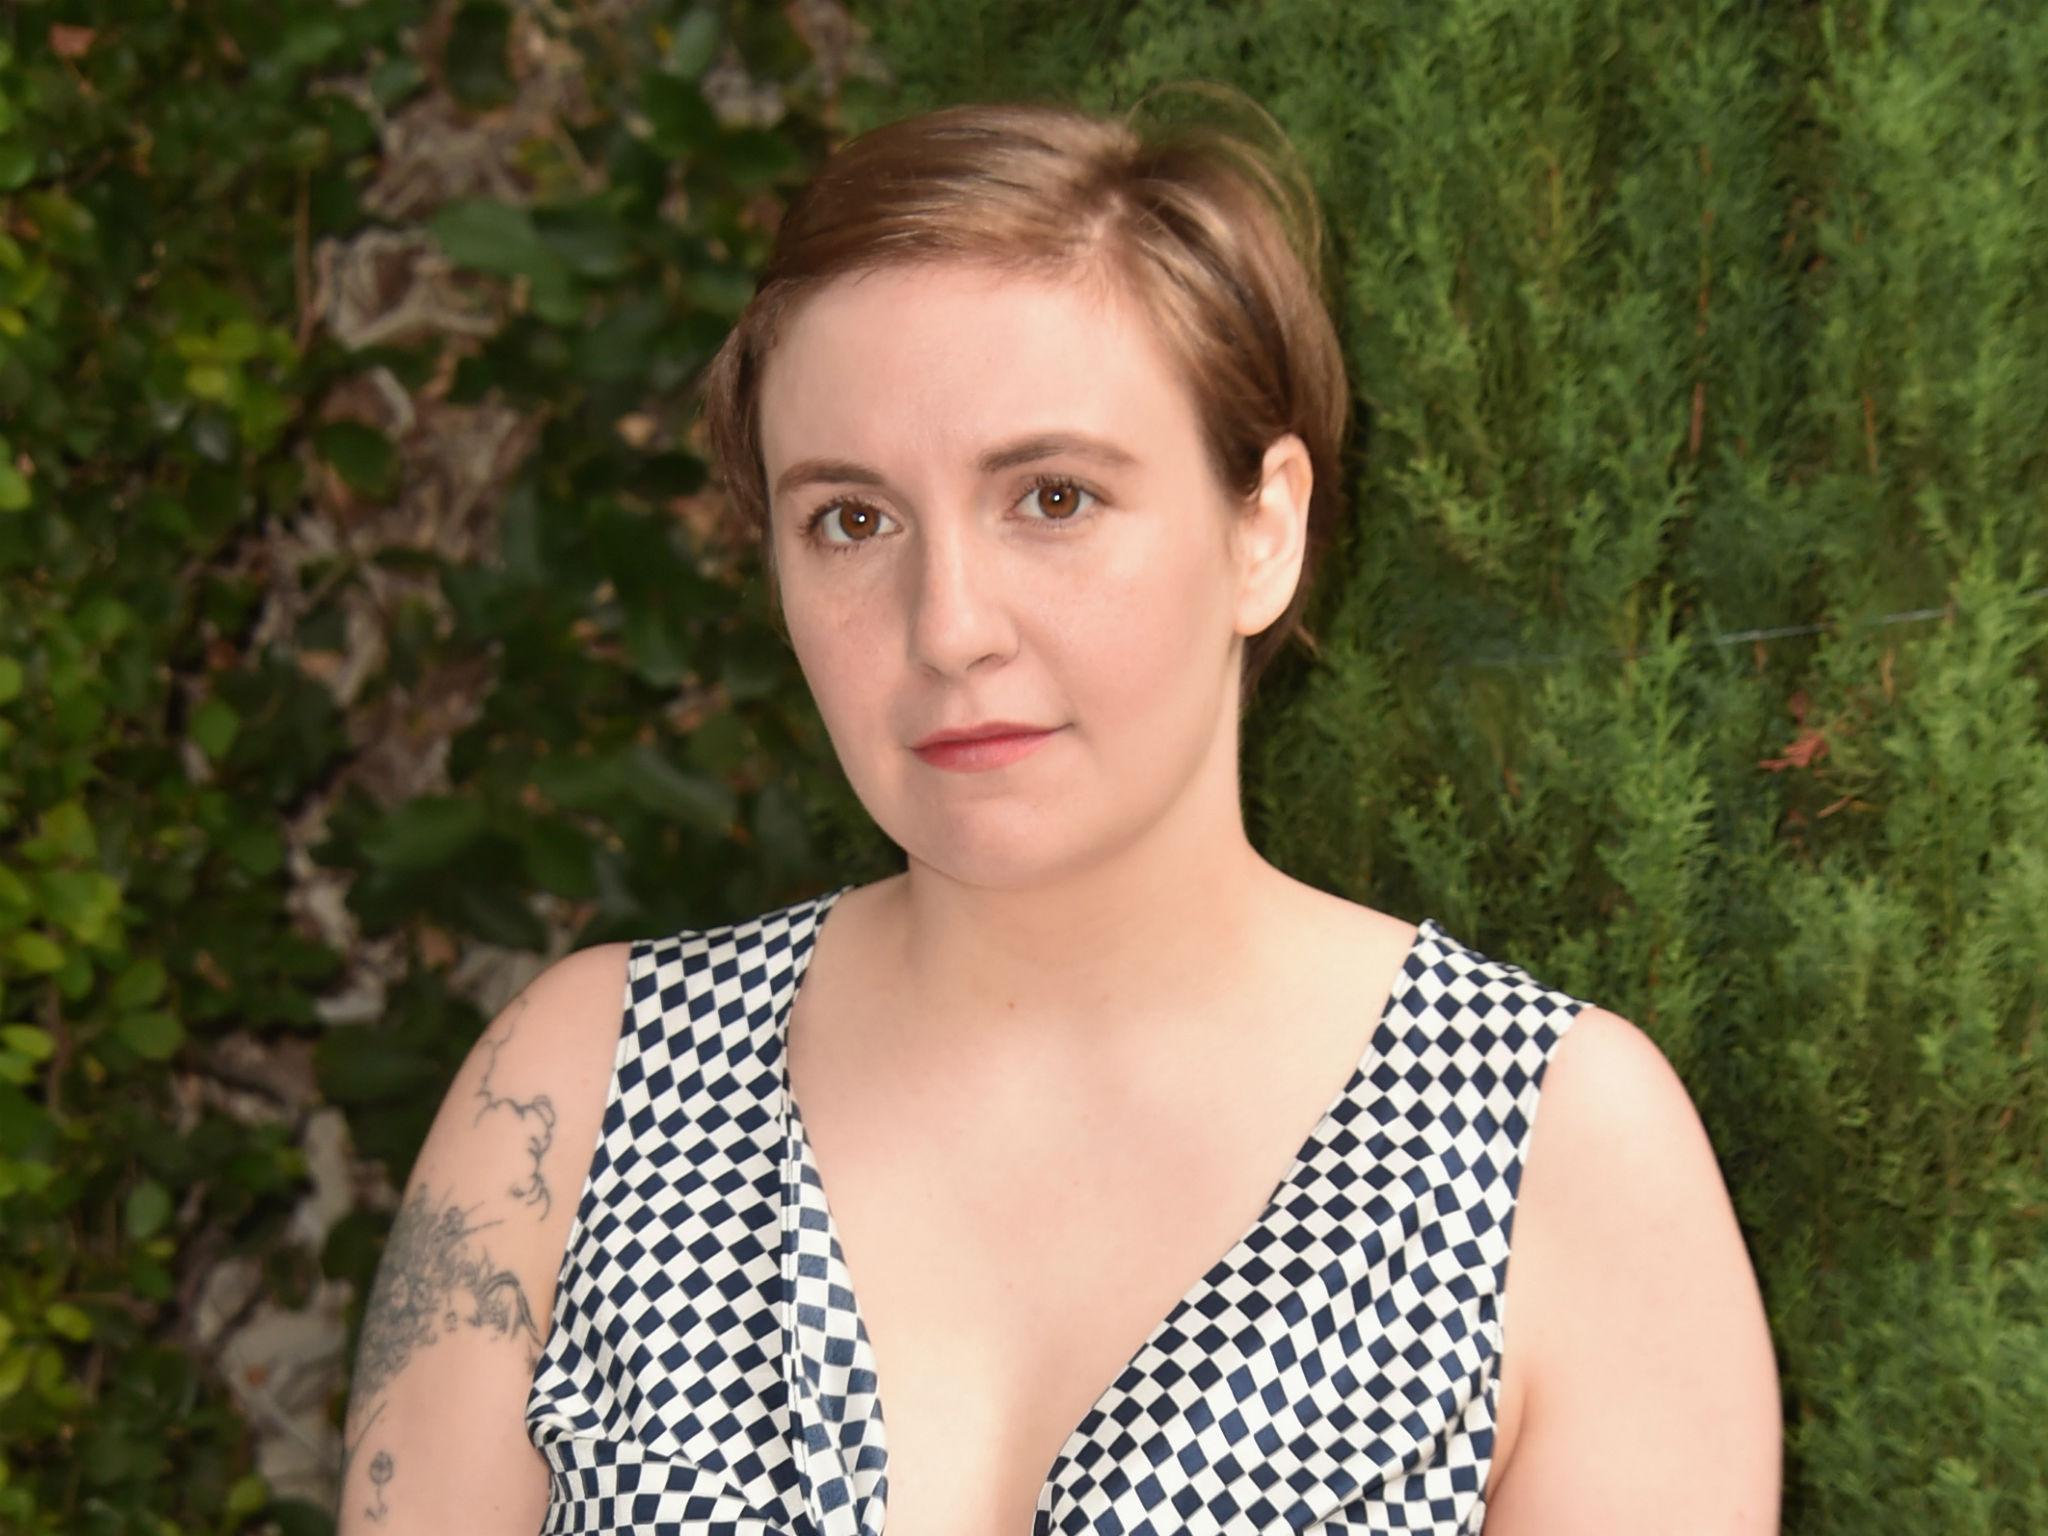 Stanford rape case Lena Dunham and the cast of Girls dedicate video message to survivor The Independent The Independent pic